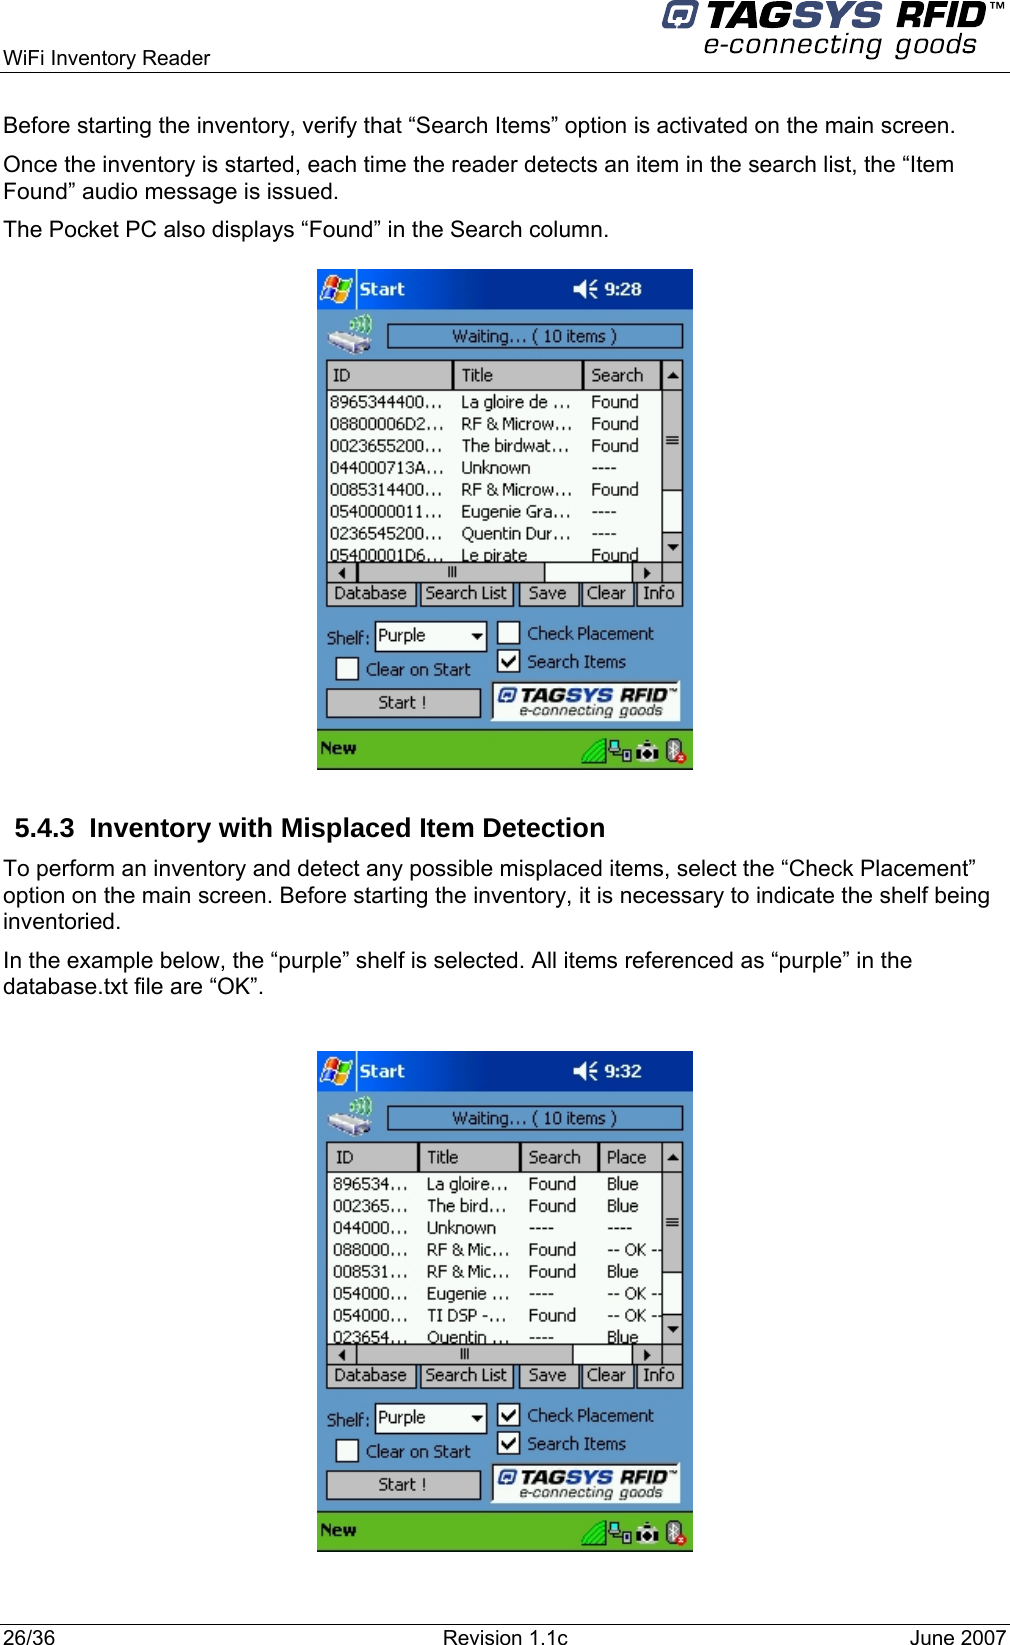  WiFi Inventory Reader     Before starting the inventory, verify that “Search Items” option is activated on the main screen. Once the inventory is started, each time the reader detects an item in the search list, the “Item Found” audio message is issued. The Pocket PC also displays “Found” in the Search column.               5.4.3  Inventory with Misplaced Item Detection To perform an inventory and detect any possible misplaced items, select the “Check Placement” option on the main screen. Before starting the inventory, it is necessary to indicate the shelf being inventoried.  In the example below, the “purple” shelf is selected. All items referenced as “purple” in the database.txt file are “OK”.    26/36  Revision 1.1c  June 2007  